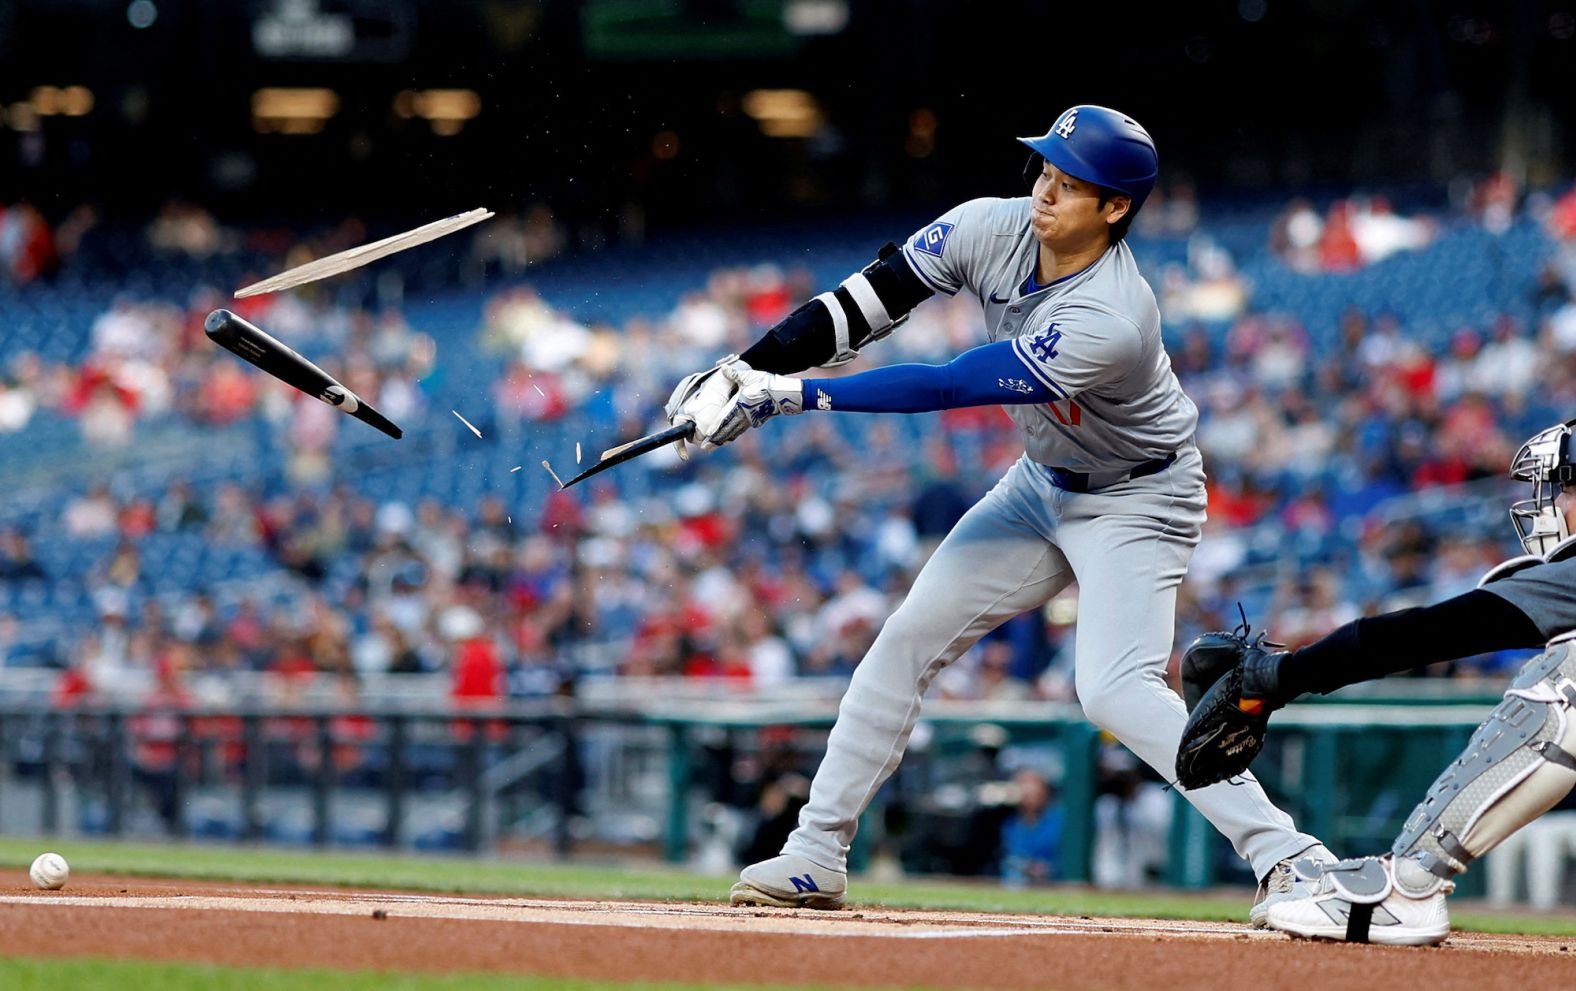 The bat of Los Angeles Dodgers star Shohei Ohtani shatters during a Major League Baseball game in Washington, DC, on Tuesday, April 23.